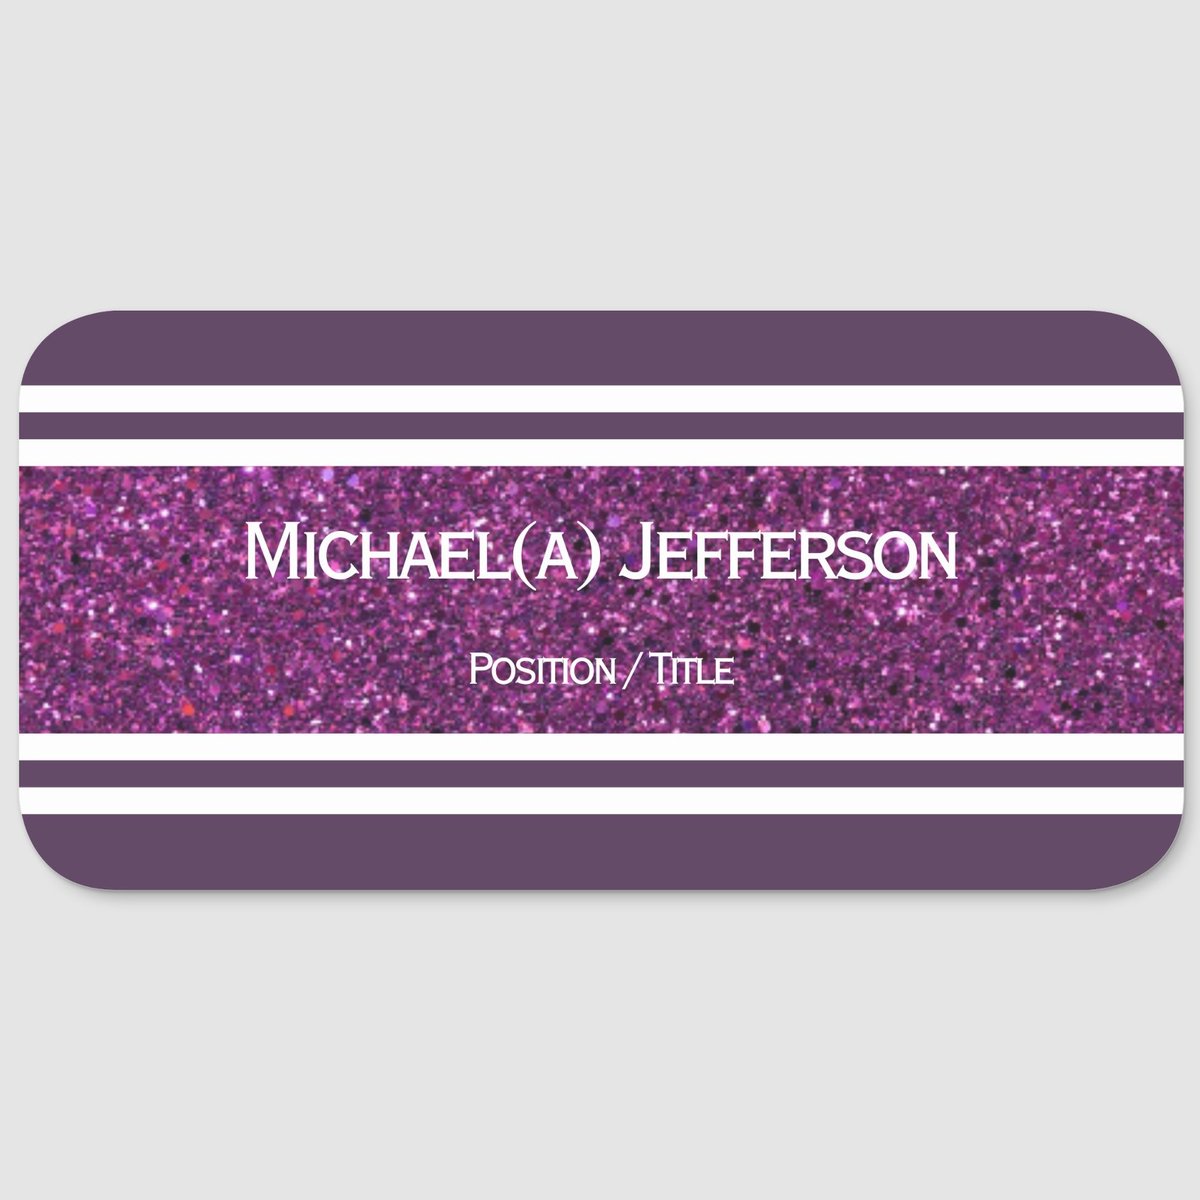 This #Purple #Glitter #nametag successfully marries vibrant energy with feminine charm zazzle.com/purple_glitter… can be a #Personalizedgift for #corporate #employees #Professional #identity for your team #nametags Give a #corporategift #zazzlemade #zazzle #BusinessMan #businesstips